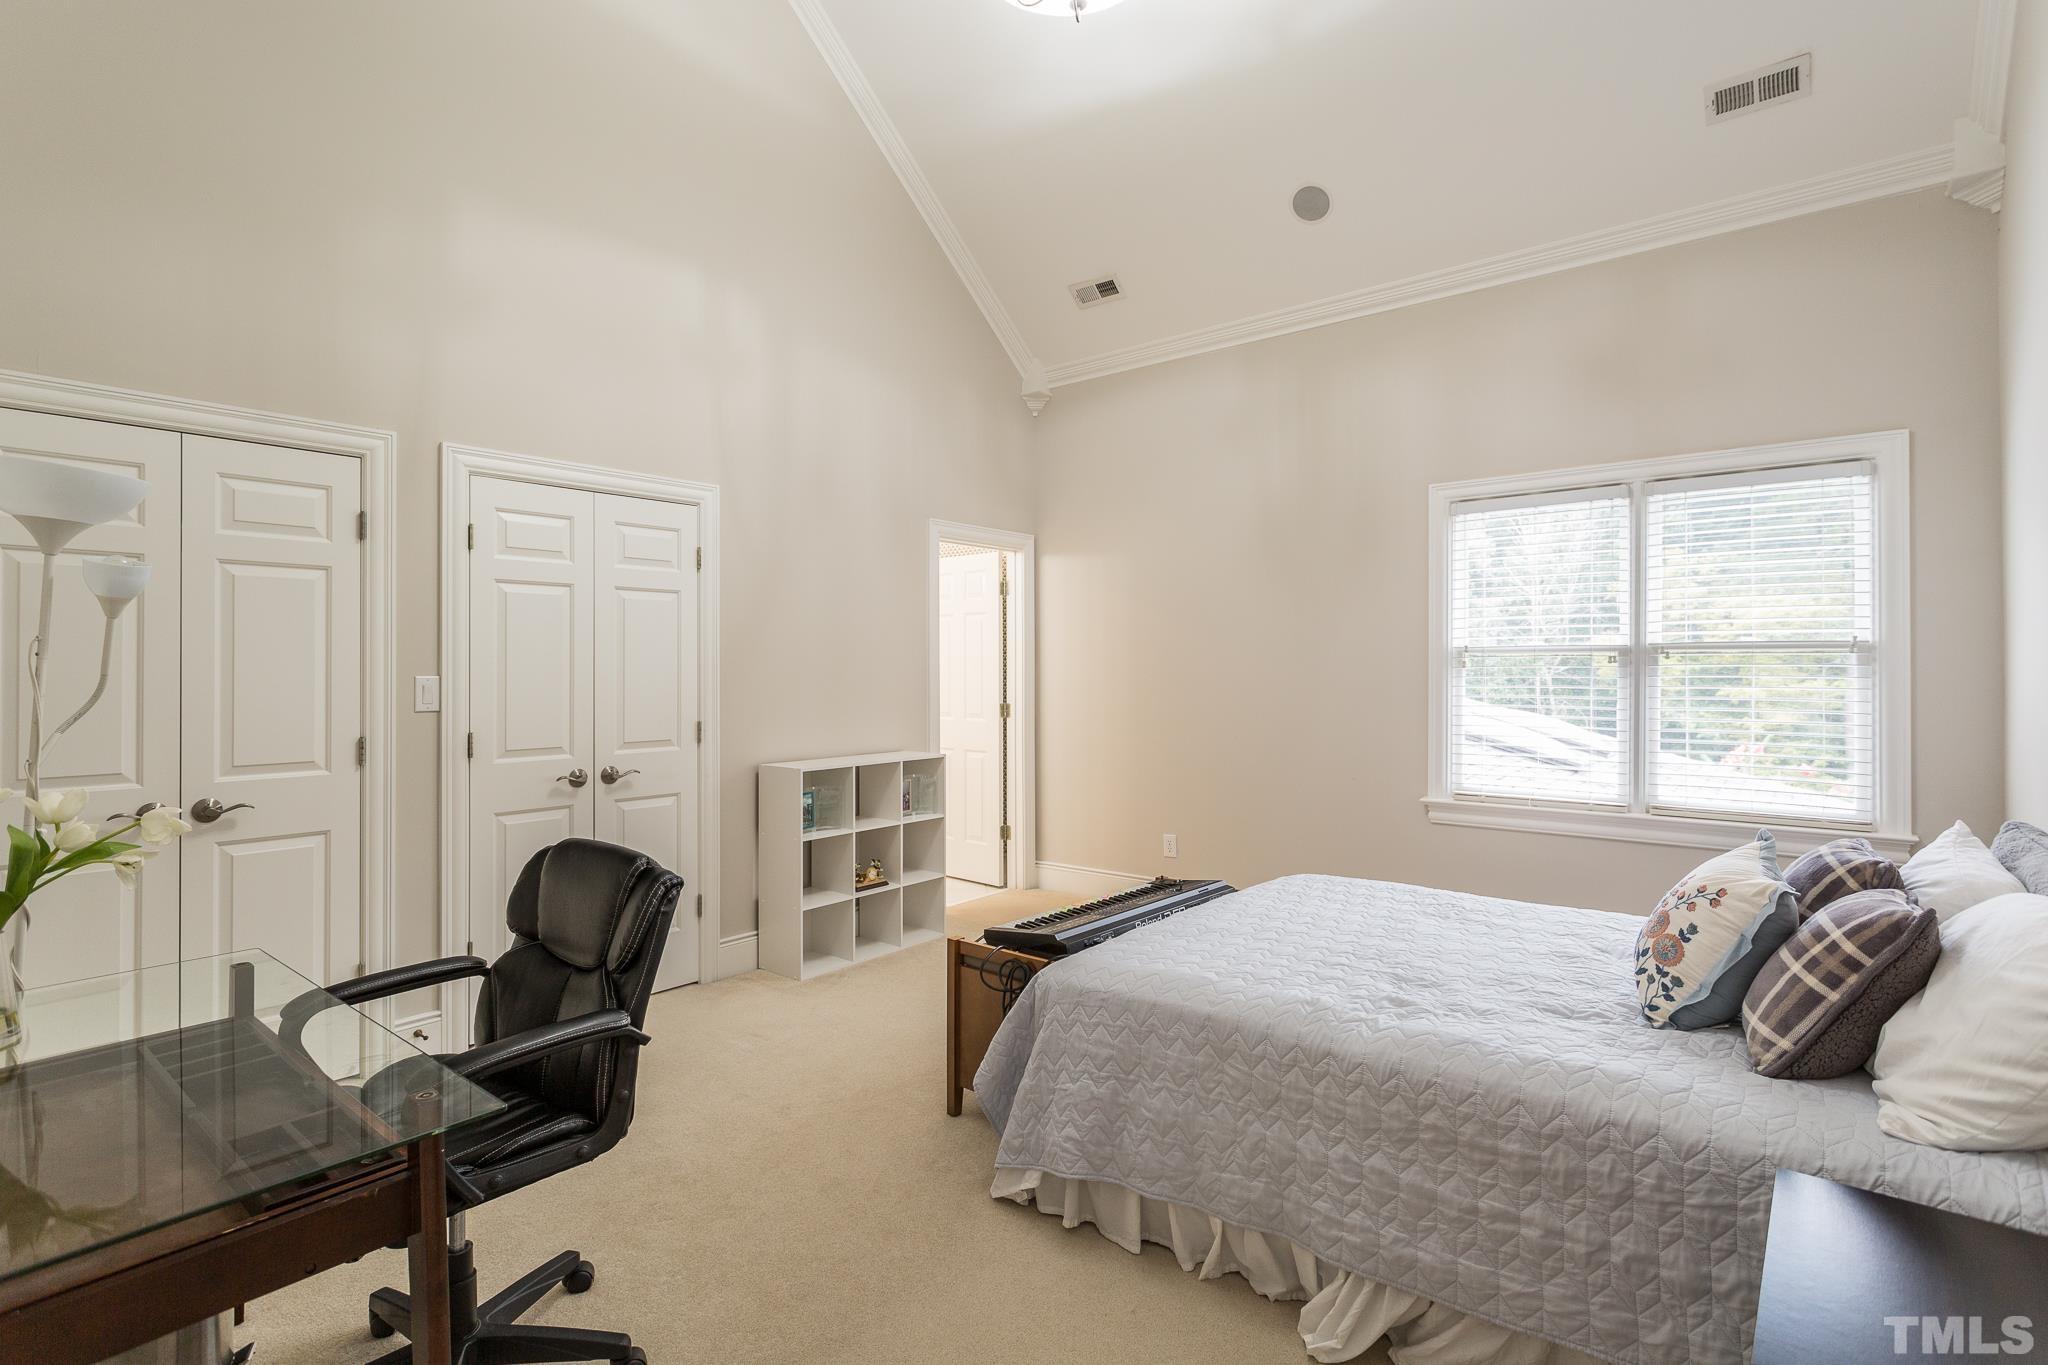 This bedroom enjoys an ensuite bath, a cathedral ceiling, and 2 double door closets.